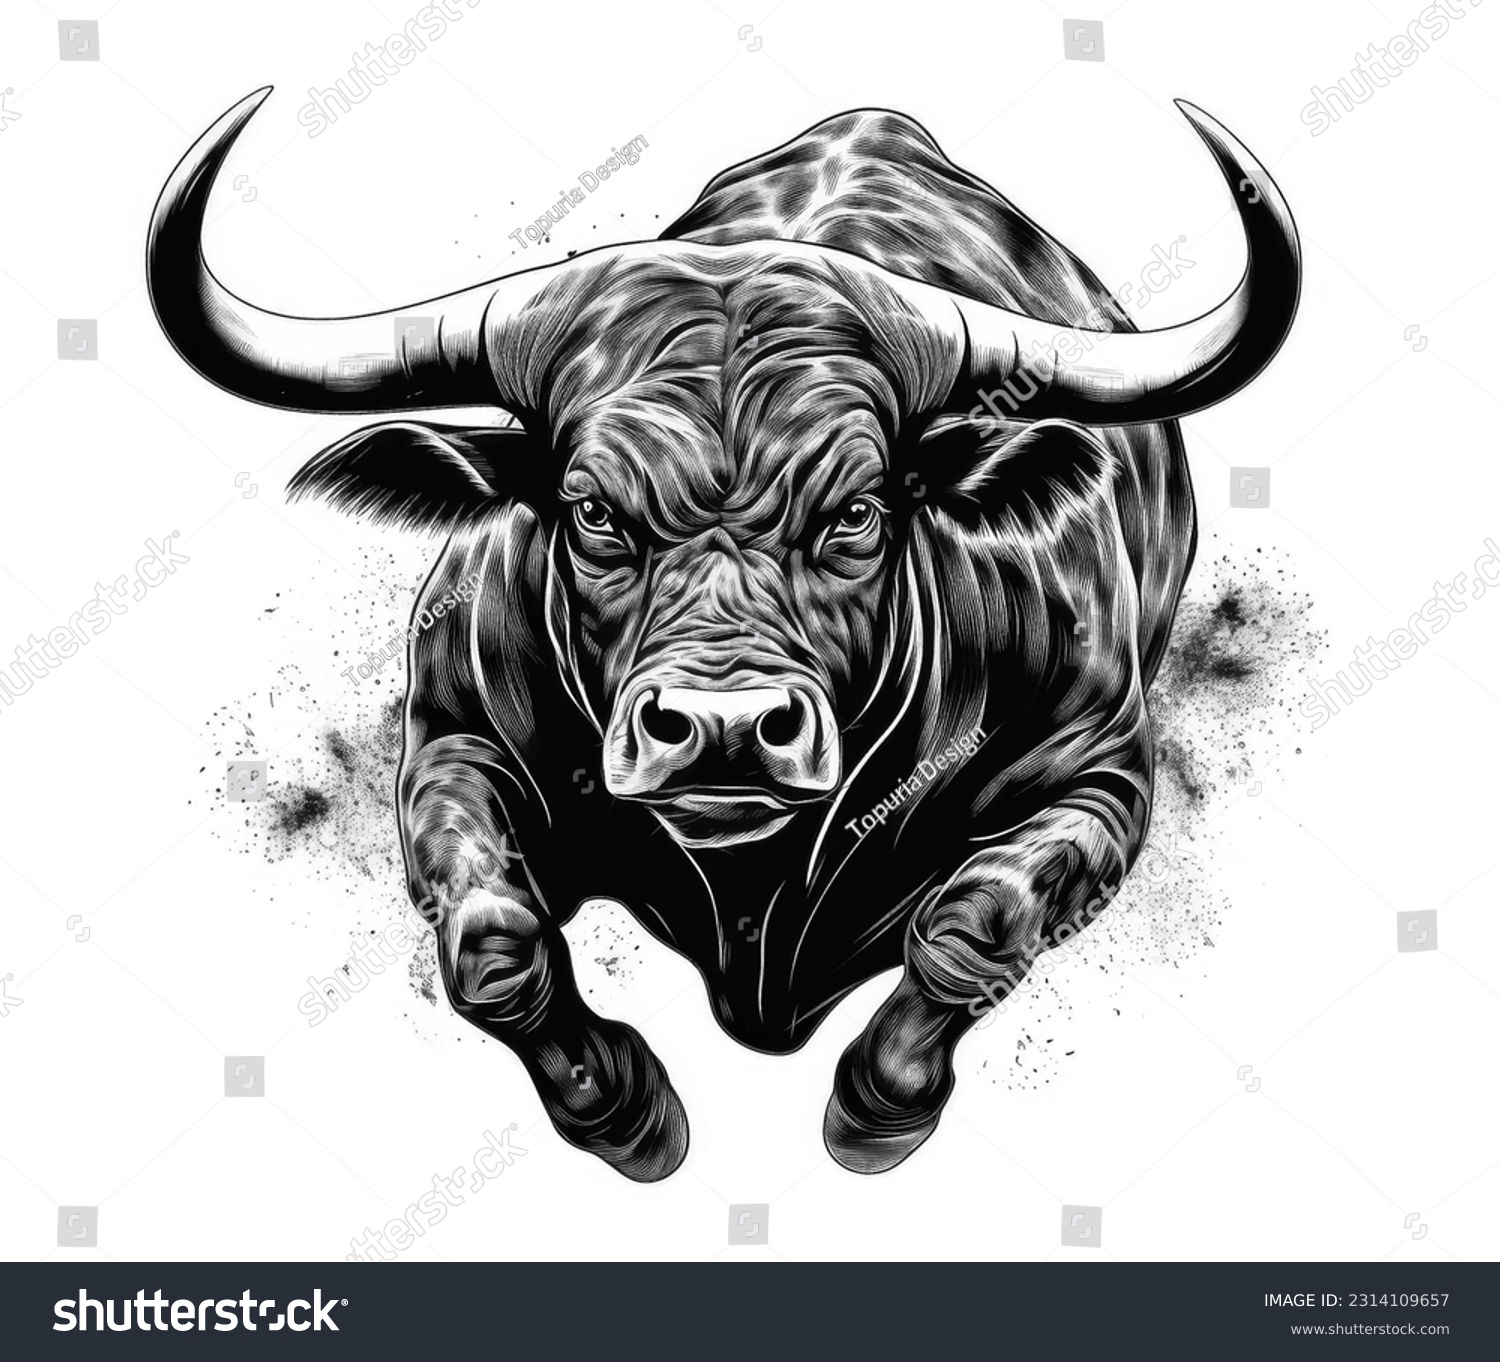 Furious raging black bull, with big horns, sketch style vector illustration for poster or tshirt design, isolated on white background. #2314109657